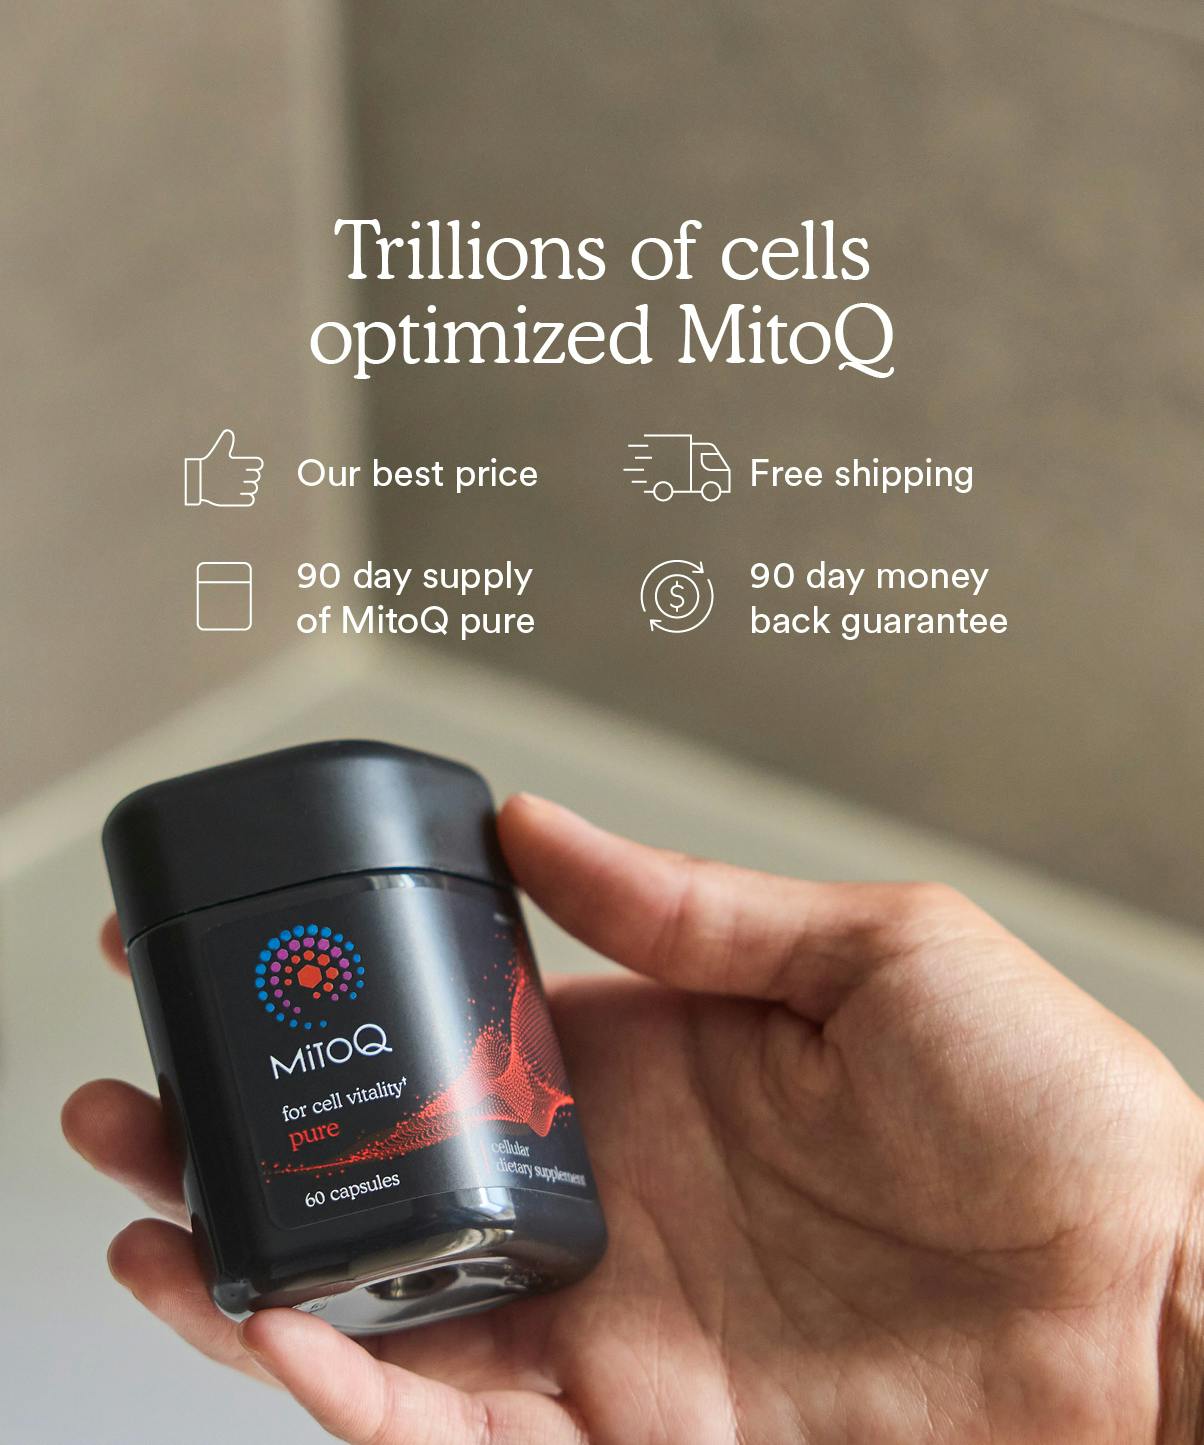 Trillions of cells optimized with MitoQ